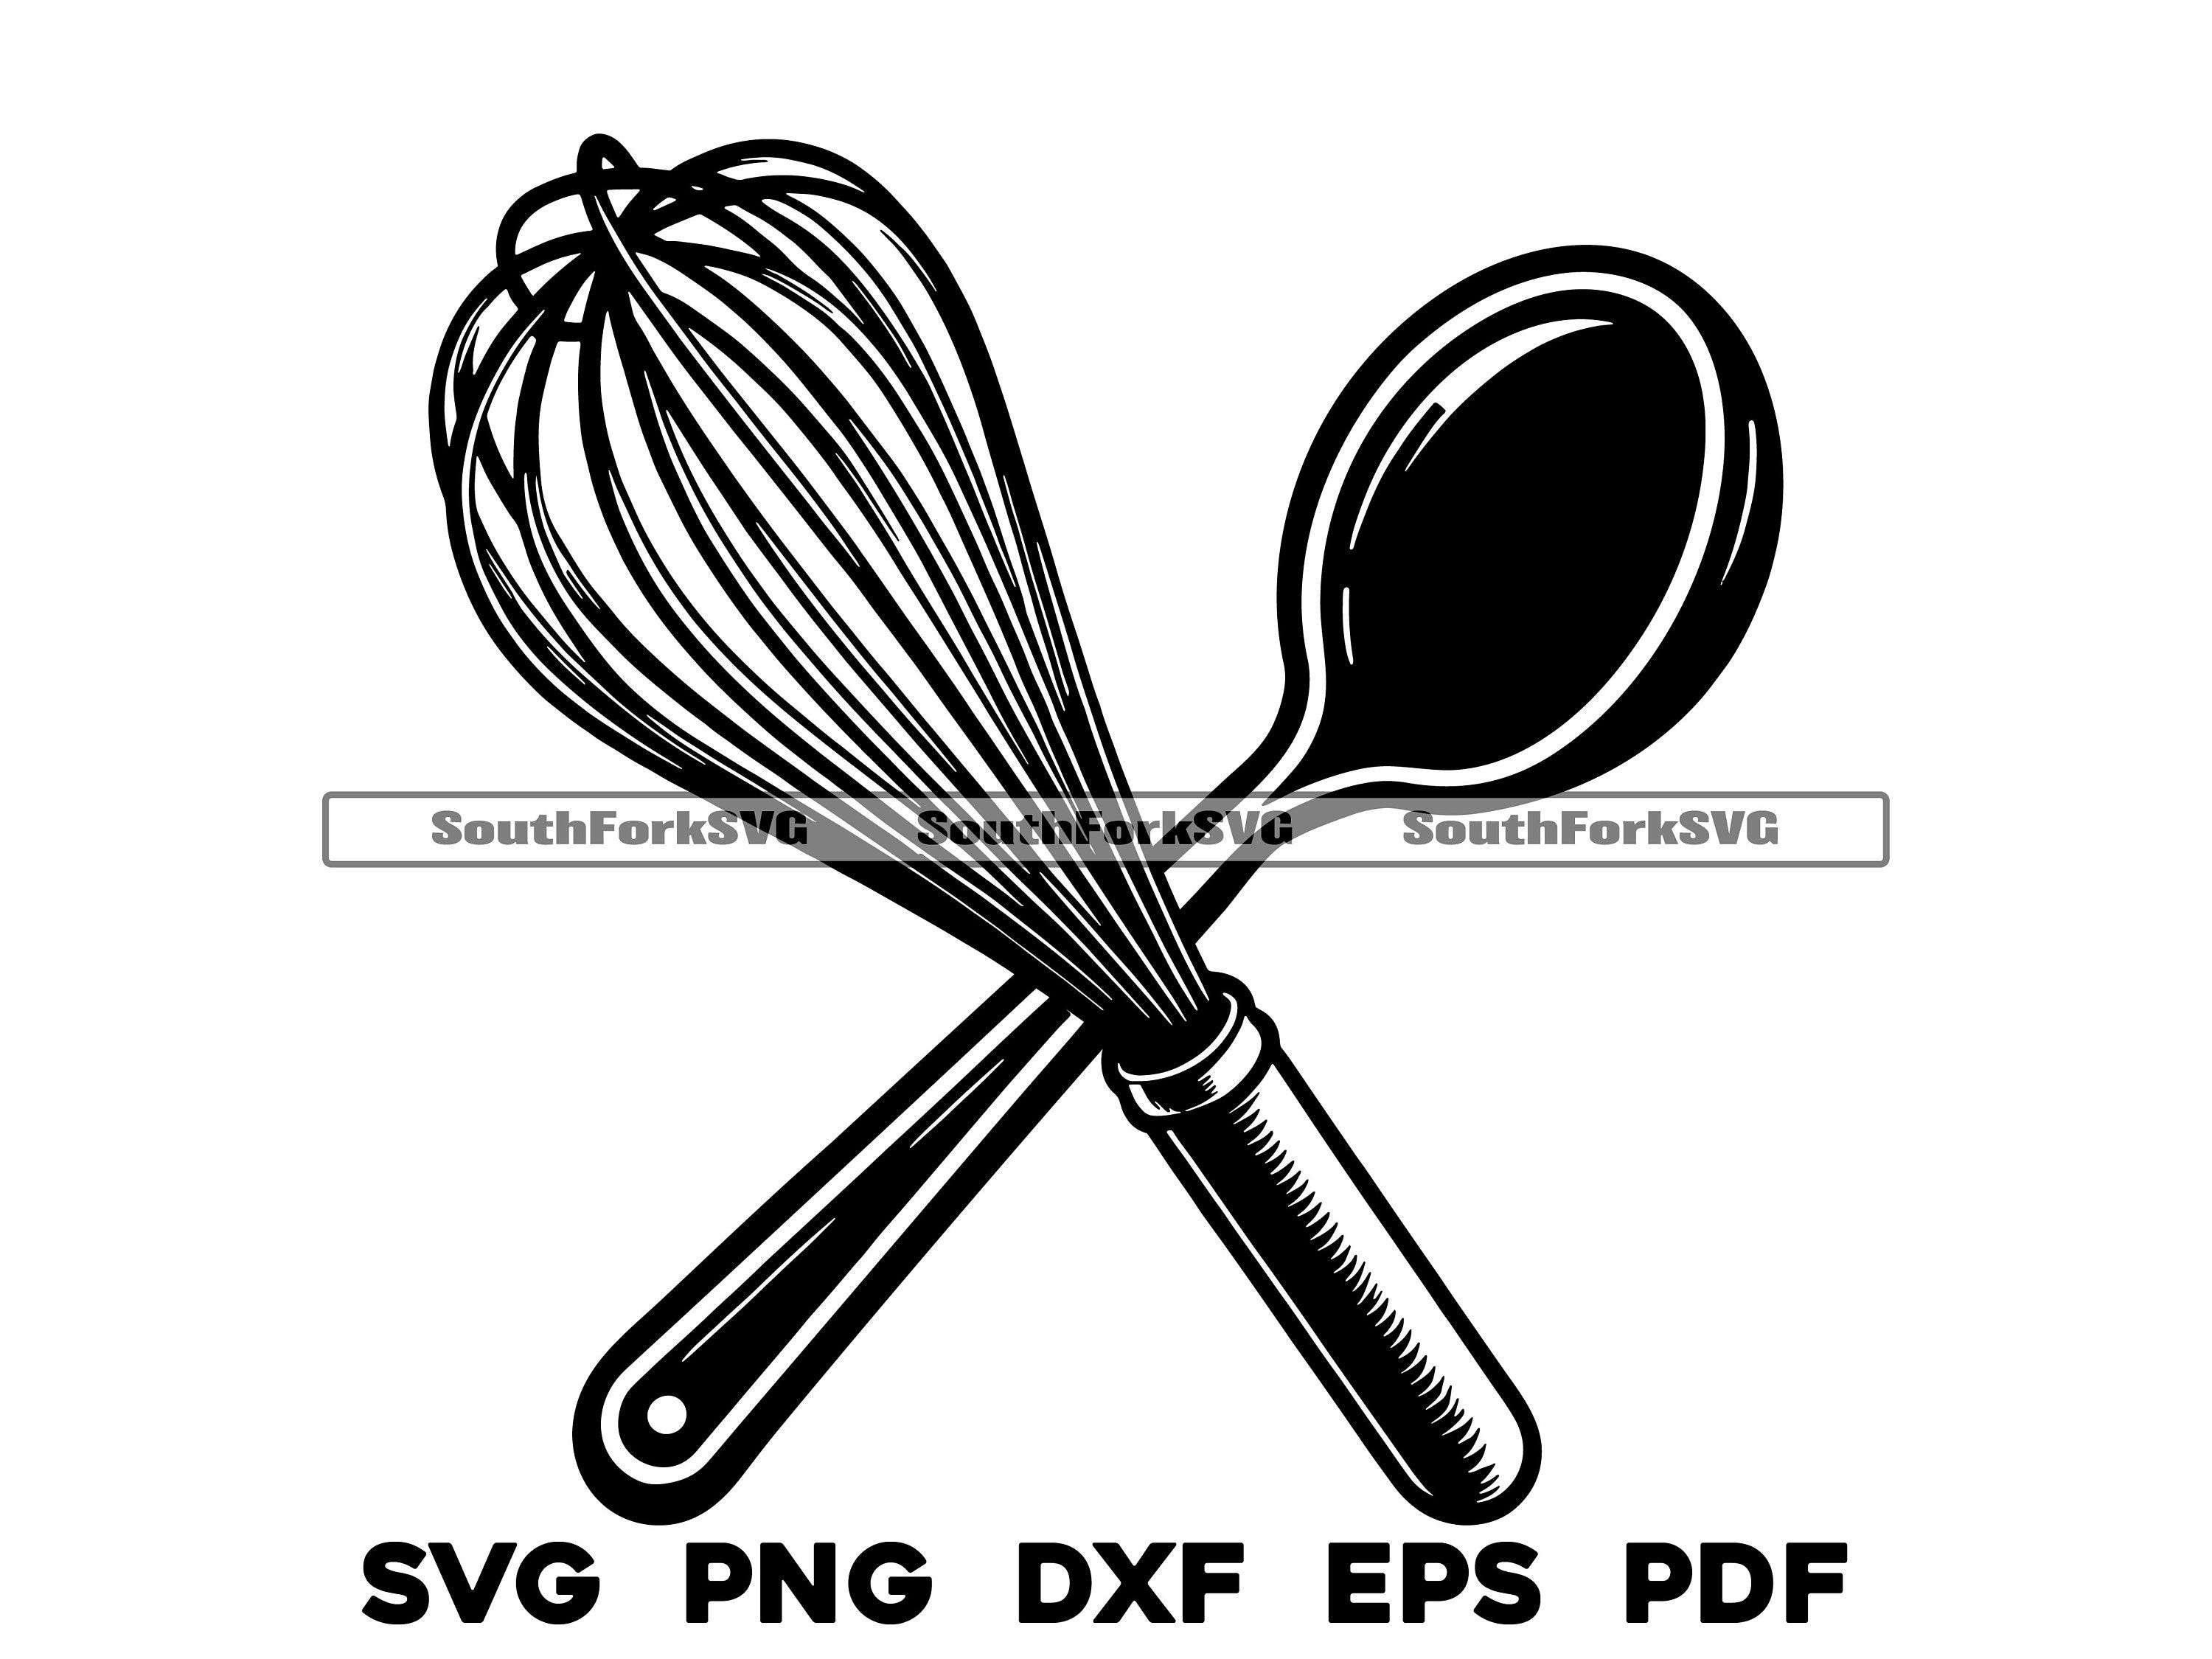 Spoon and Whisk Crossed | svg png dxf eps pdf | vector graphic cut file laser clip art | instant digital download commercial use